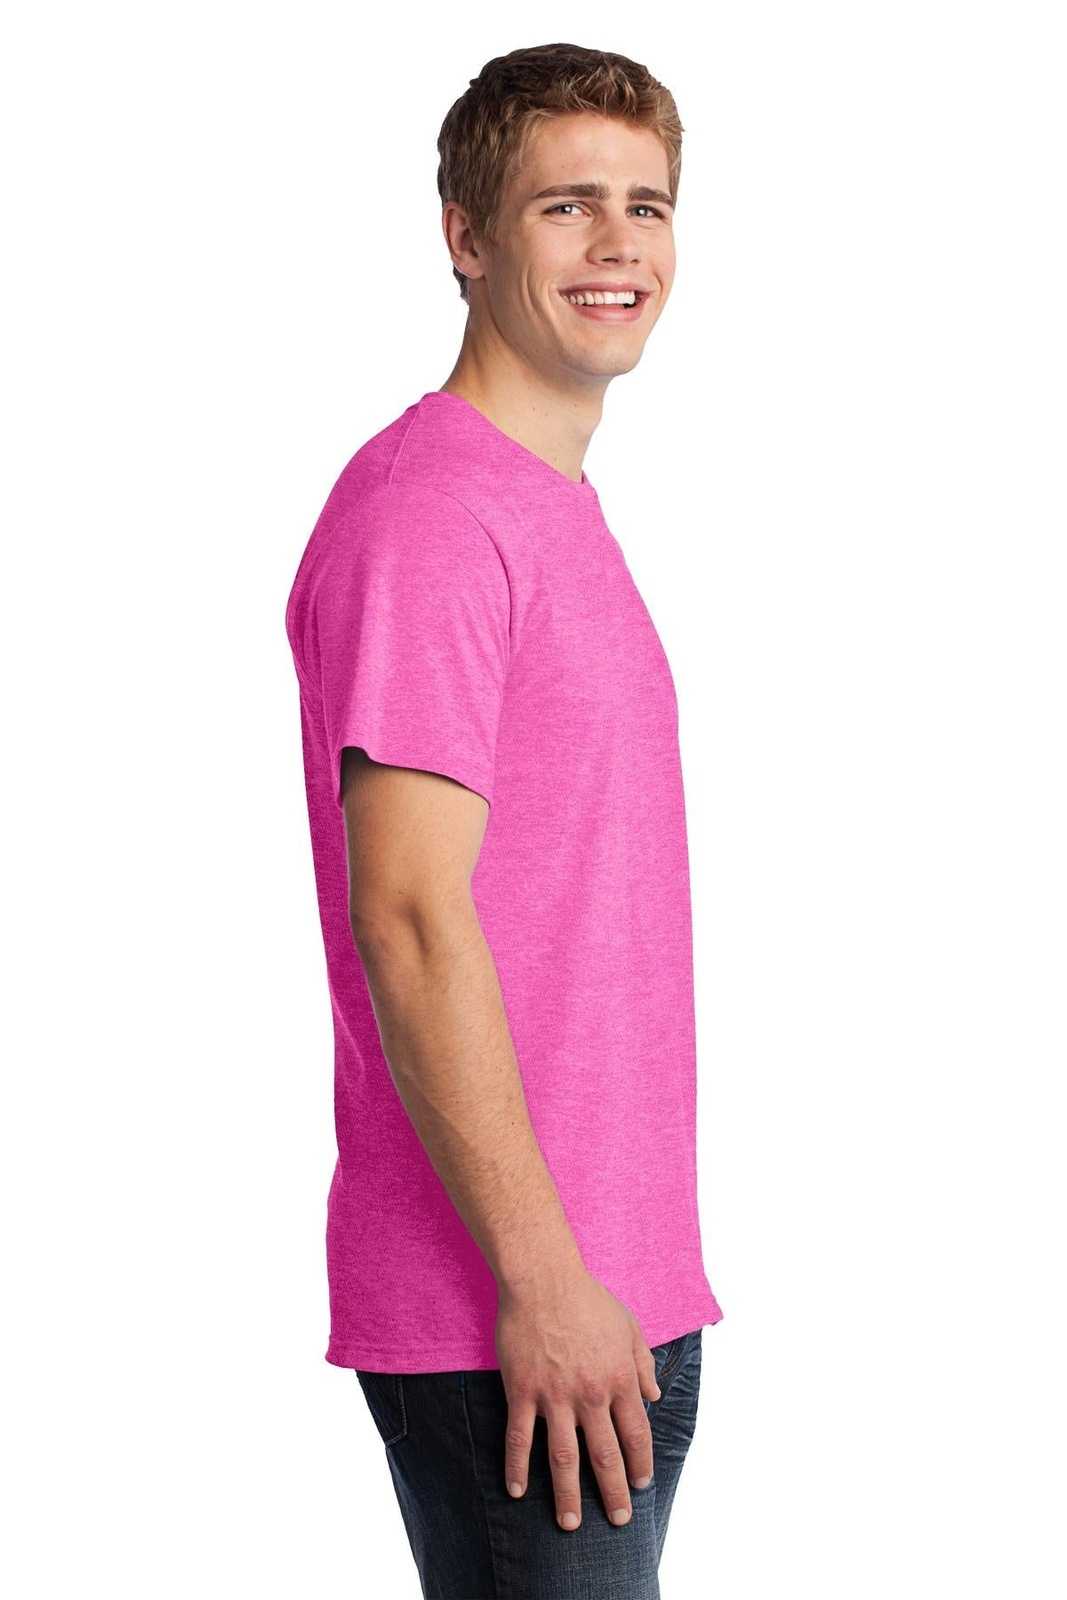 Fruit of the Loom 3930 HD Cotton 100% Cotton T-Shirt - Retro Heather Pink - HIT a Double